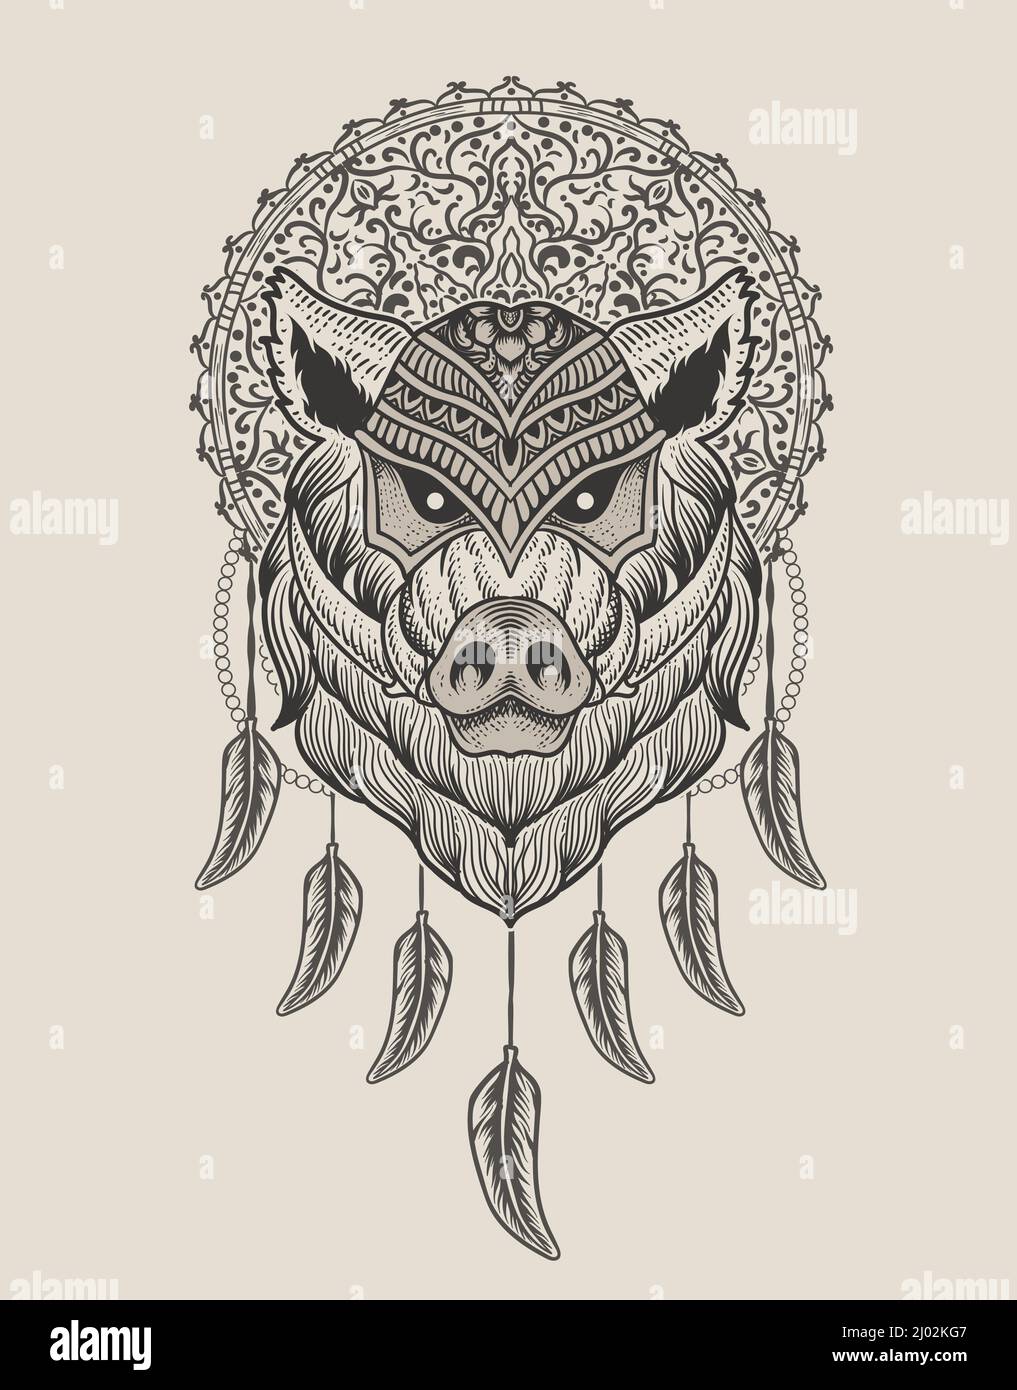 illustration wild boar head with engraving mandala style Stock Vector